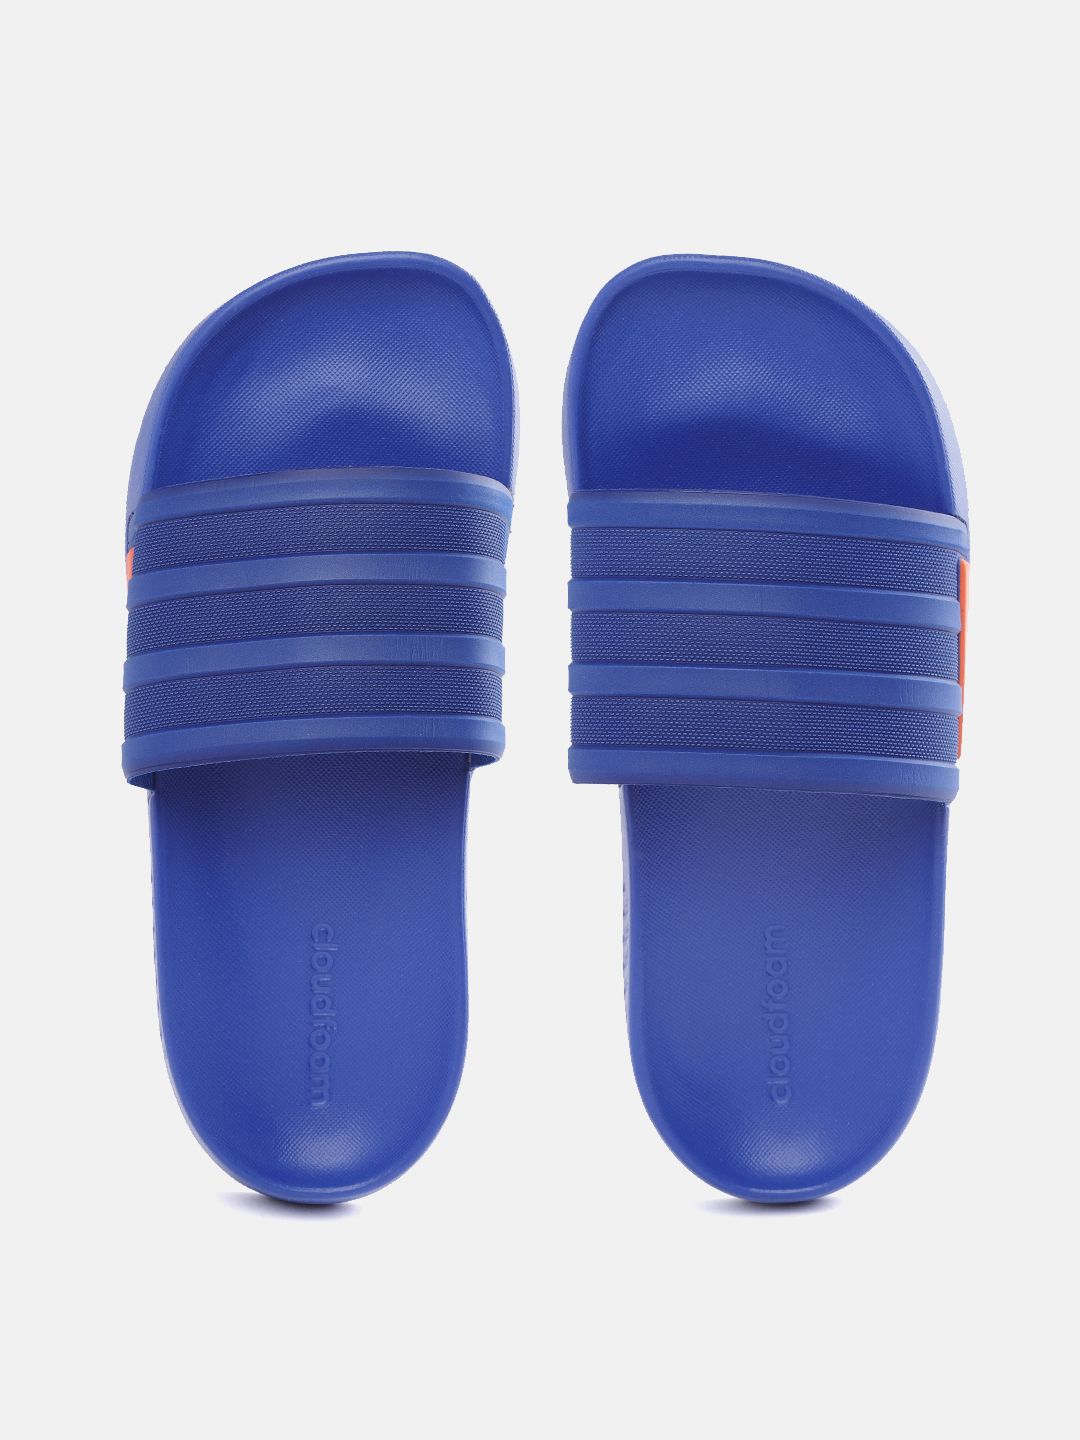 ADIDAS Unisex Blue Striped Iconic Runner Sliders Price in India